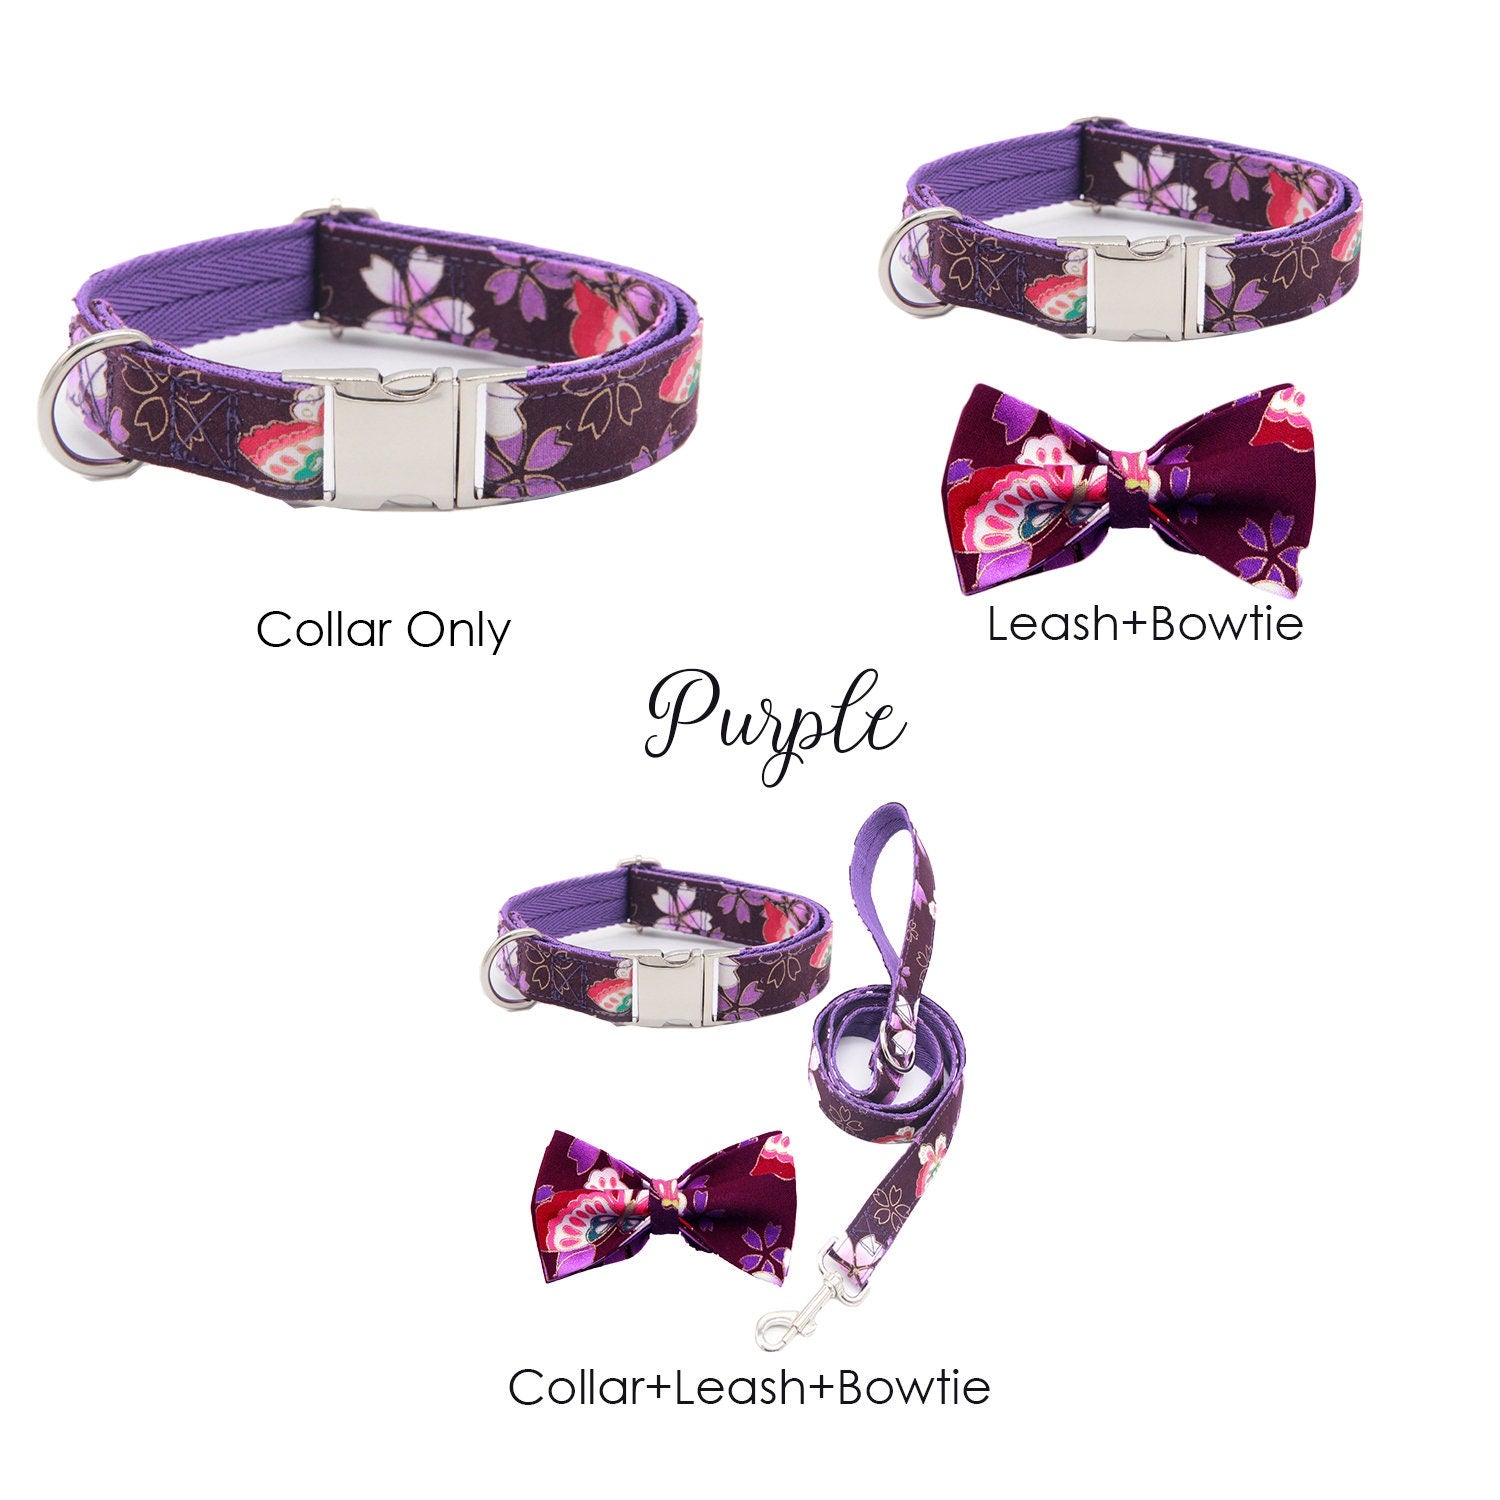 Personalized Engraved Handmade Dog Collar and Leash set, Matching Bowtie in Reb, Blue Pink Purple and Japan Pattern, Great for all Occasions